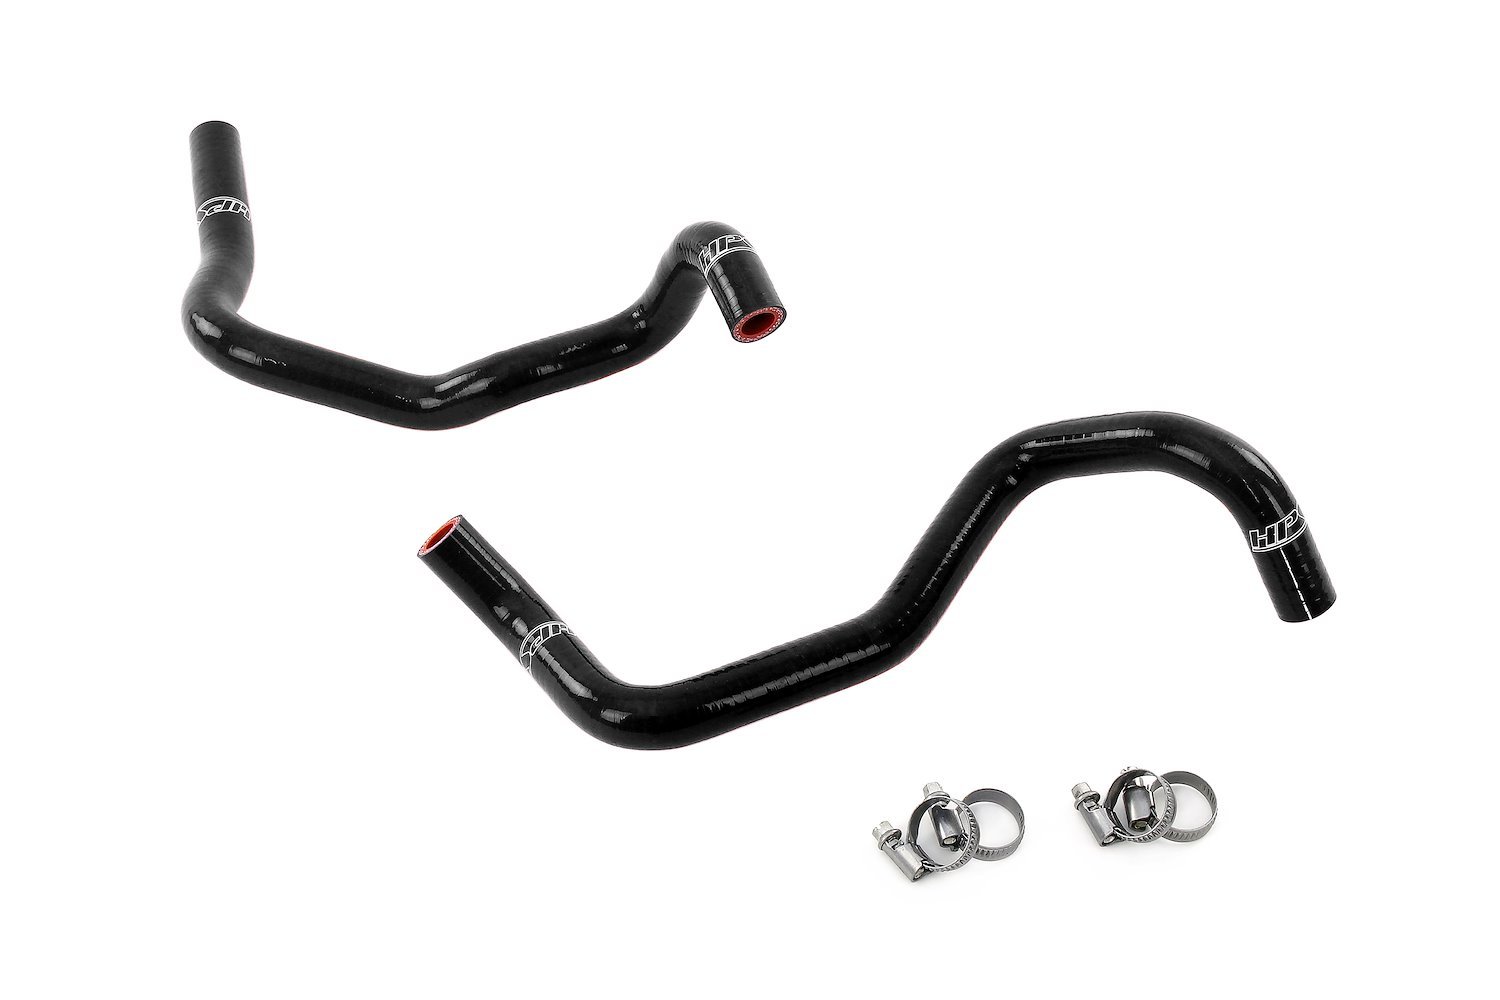 57-2131H-BLK Heater Hose Kit, High-Temp 3-Ply Reinforced Silicone, Replaces OEM Rubber Heater Hoses